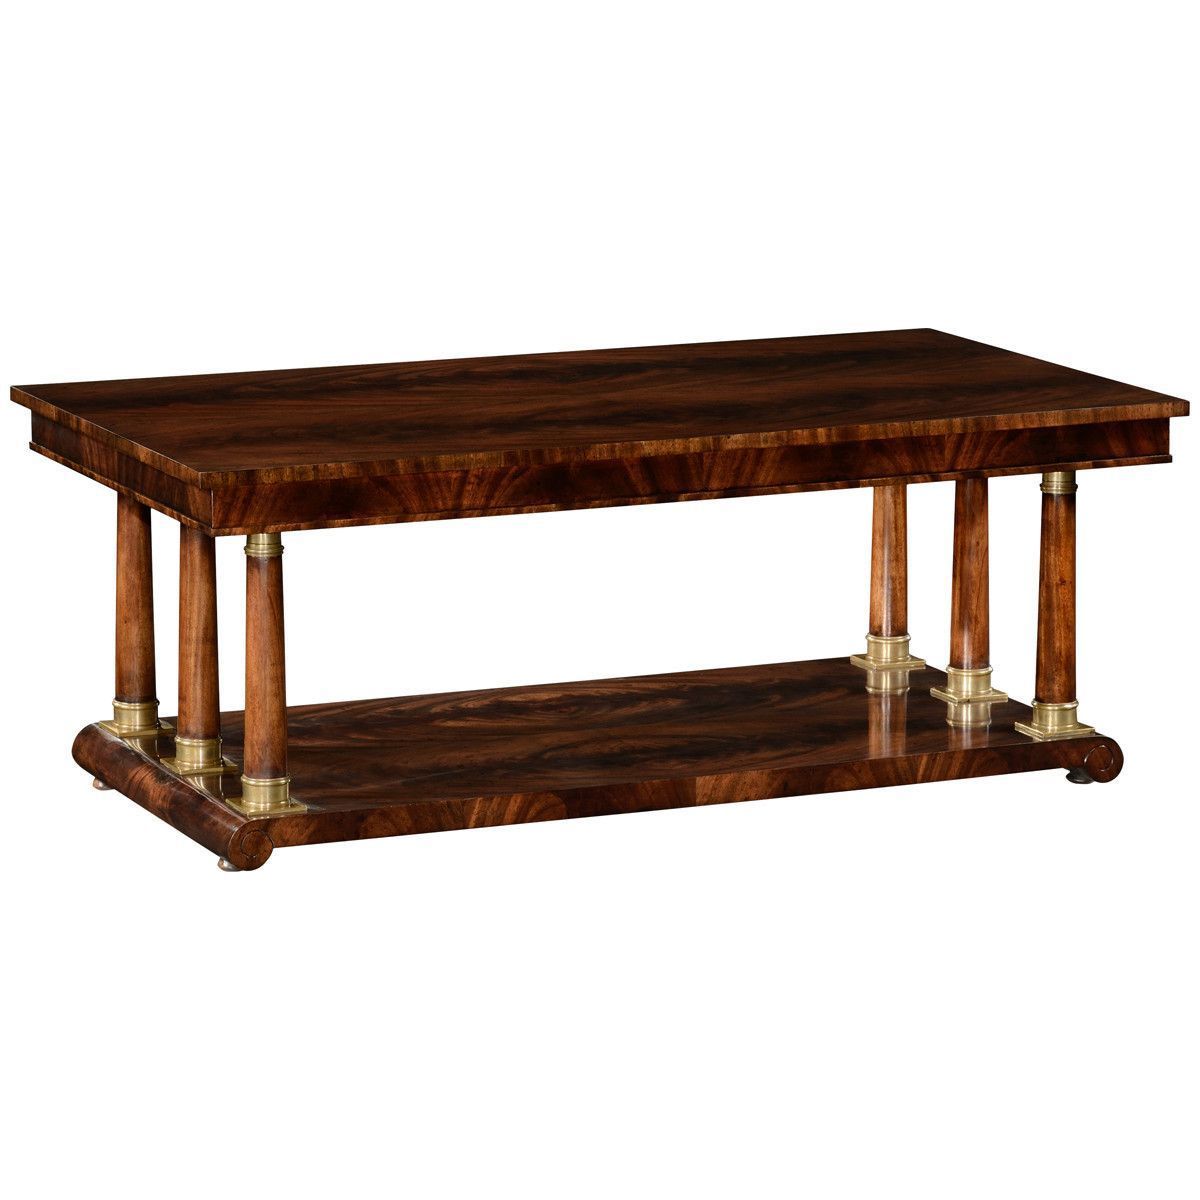 Jonathan Charles Mahogany Biedermeier Style Rectangular Coffee Table Pertaining To Rectangular Coffee Tables With Pedestal Bases (View 17 of 20)